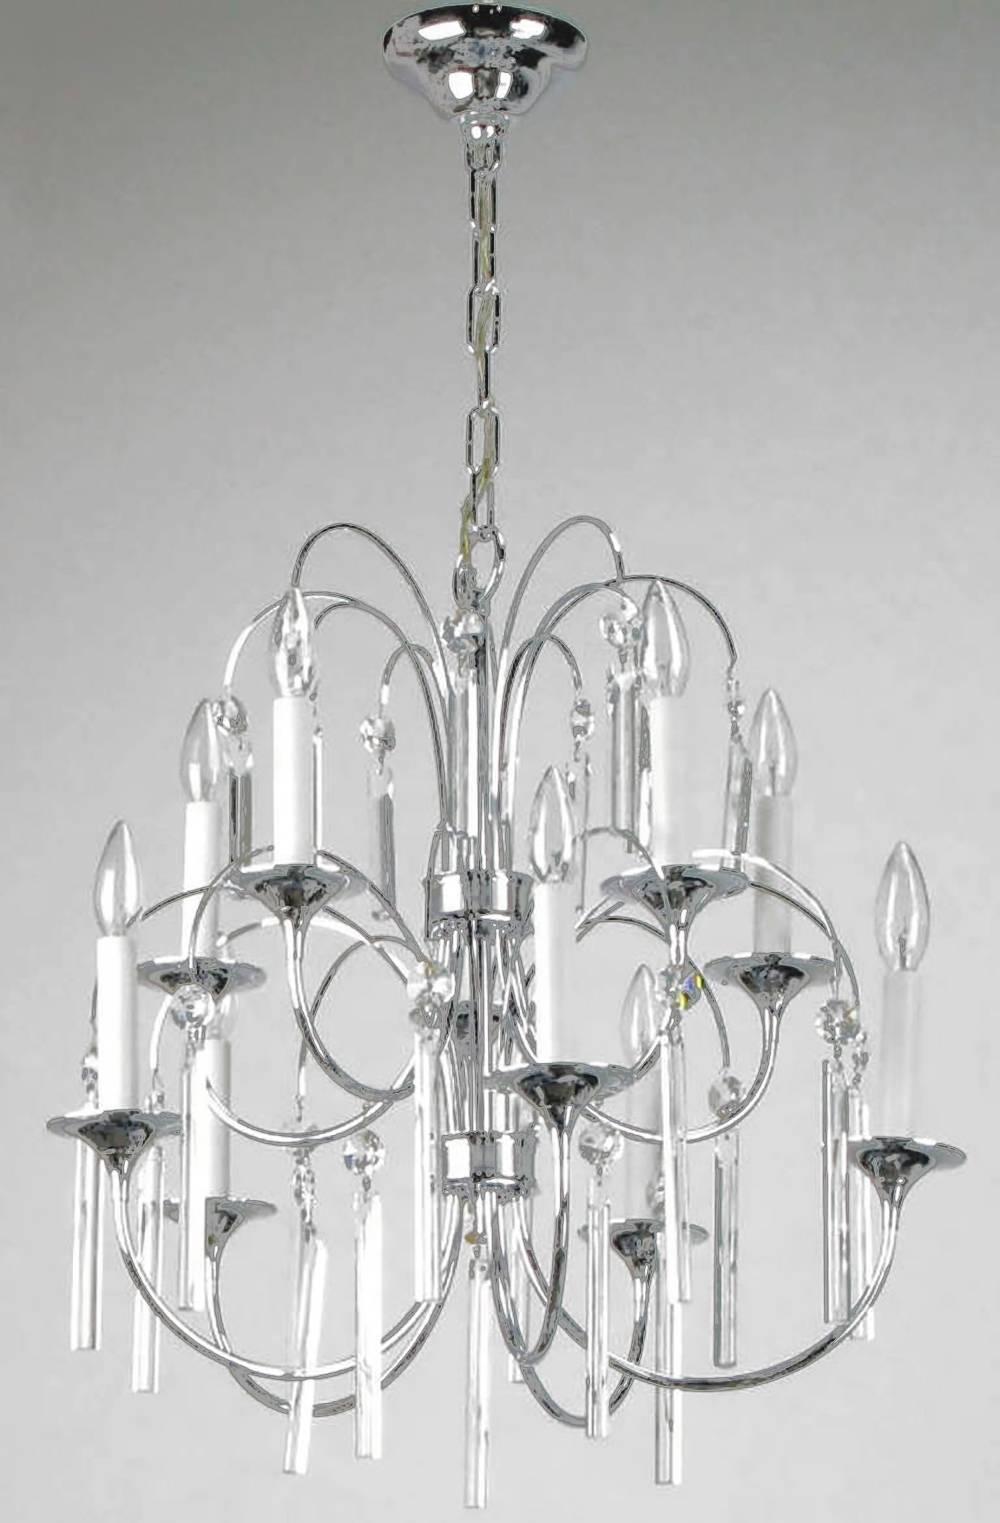 Beautiful chrome over brass ten-arm Italian chandelier with trumpet bobèches and long square rod crystals with angled tops. Excellent build quality and interesting shape that when lit, gives the appearance of an illuminated fountain. Height